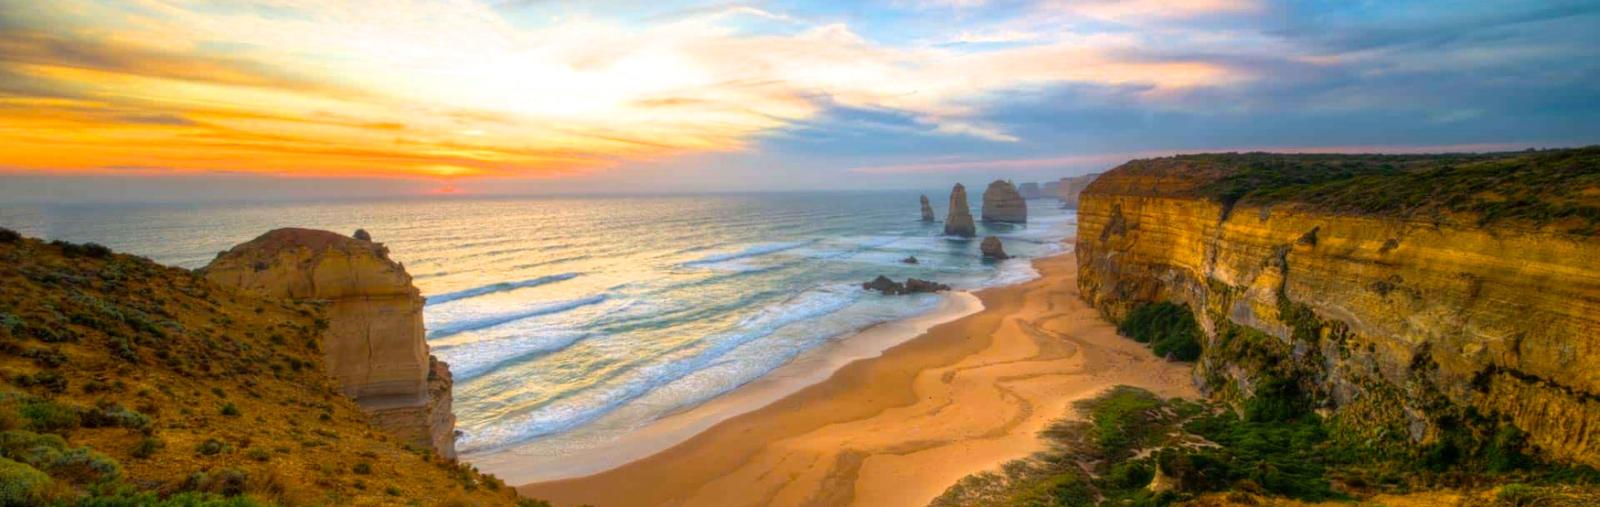  Sydney to Melbourne – A Private Tour Itinerary